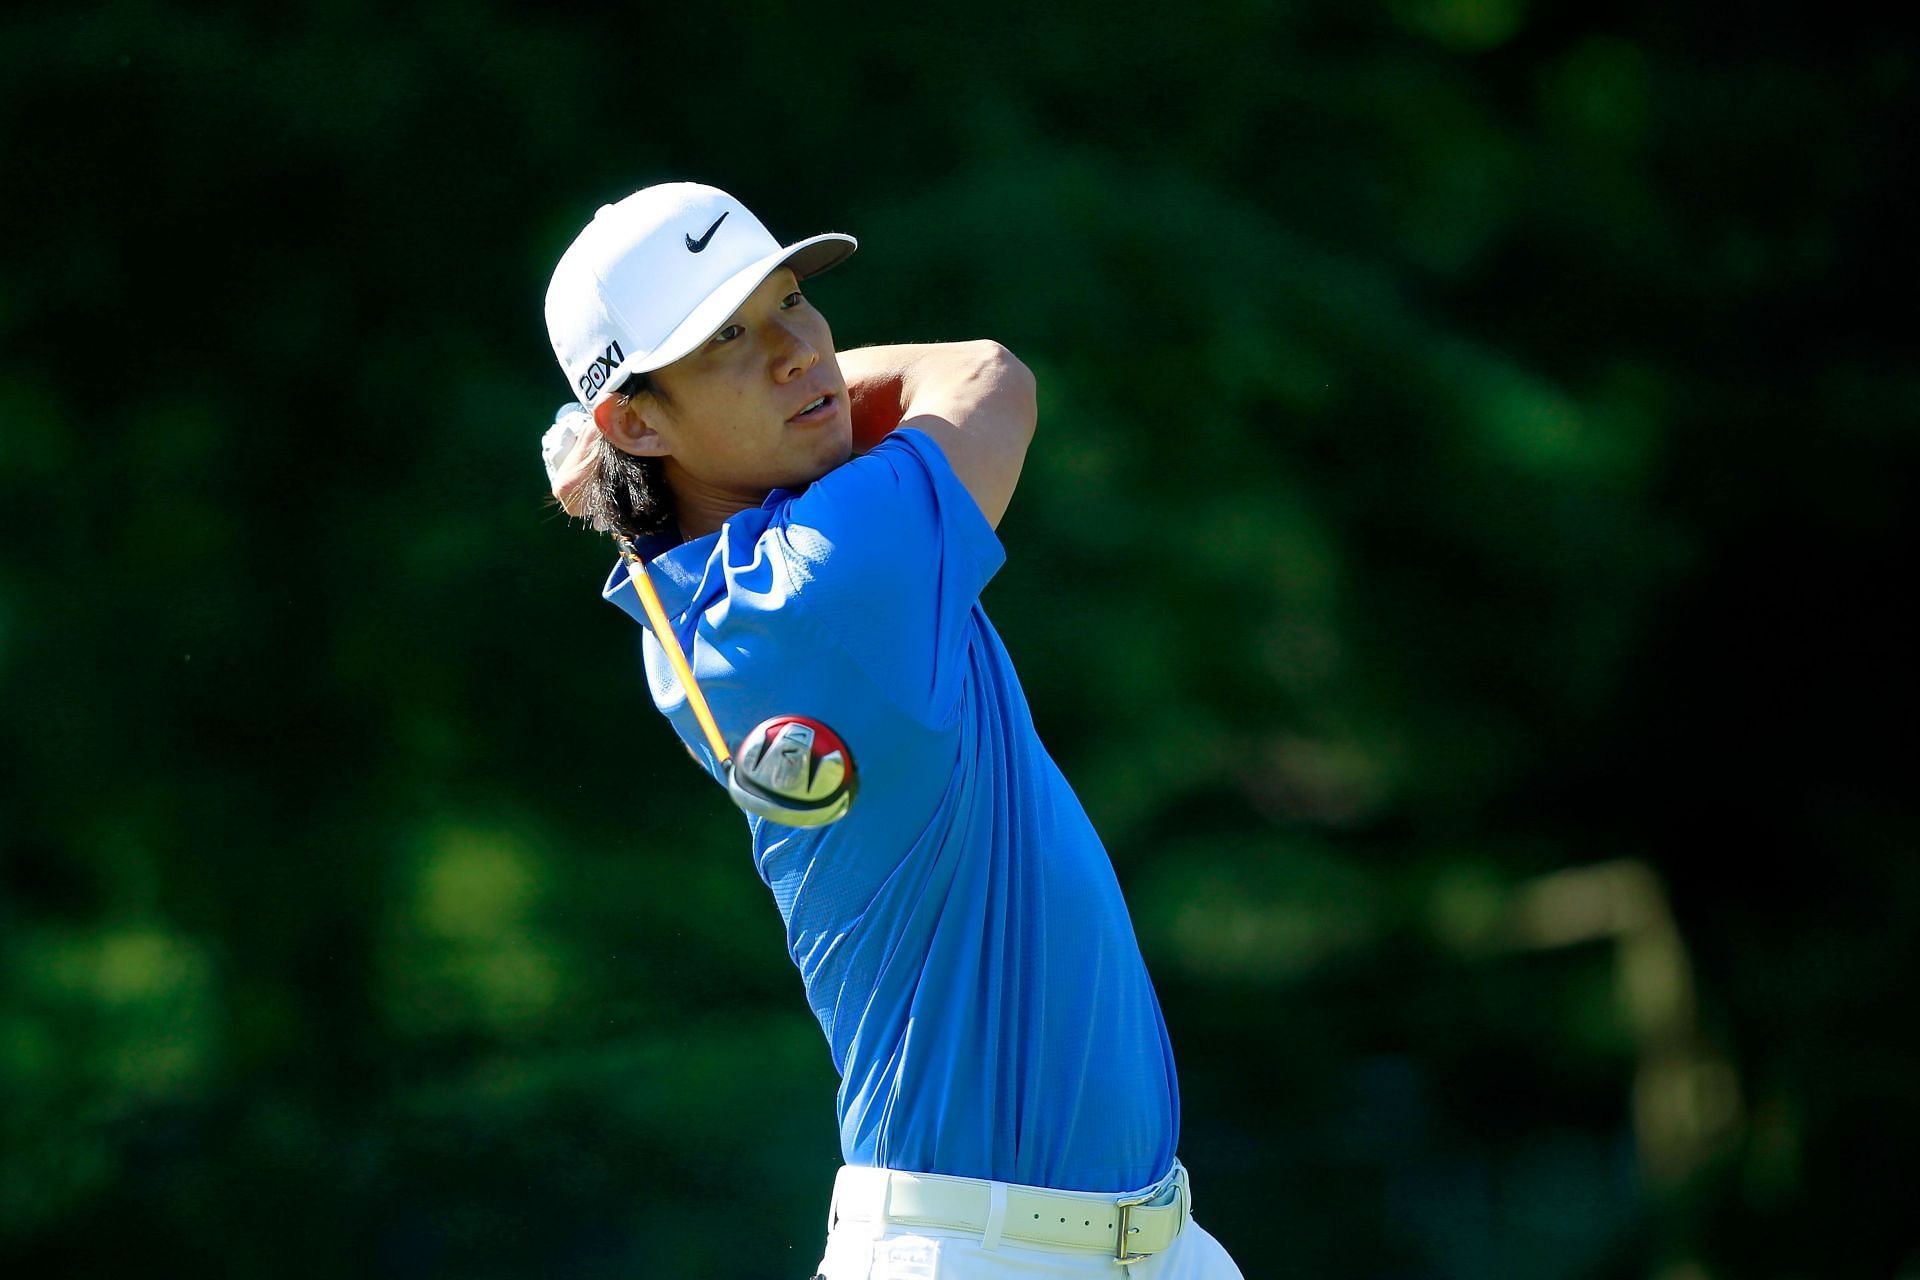 Anthony Kim is making his professional comeback with the LIV Golf